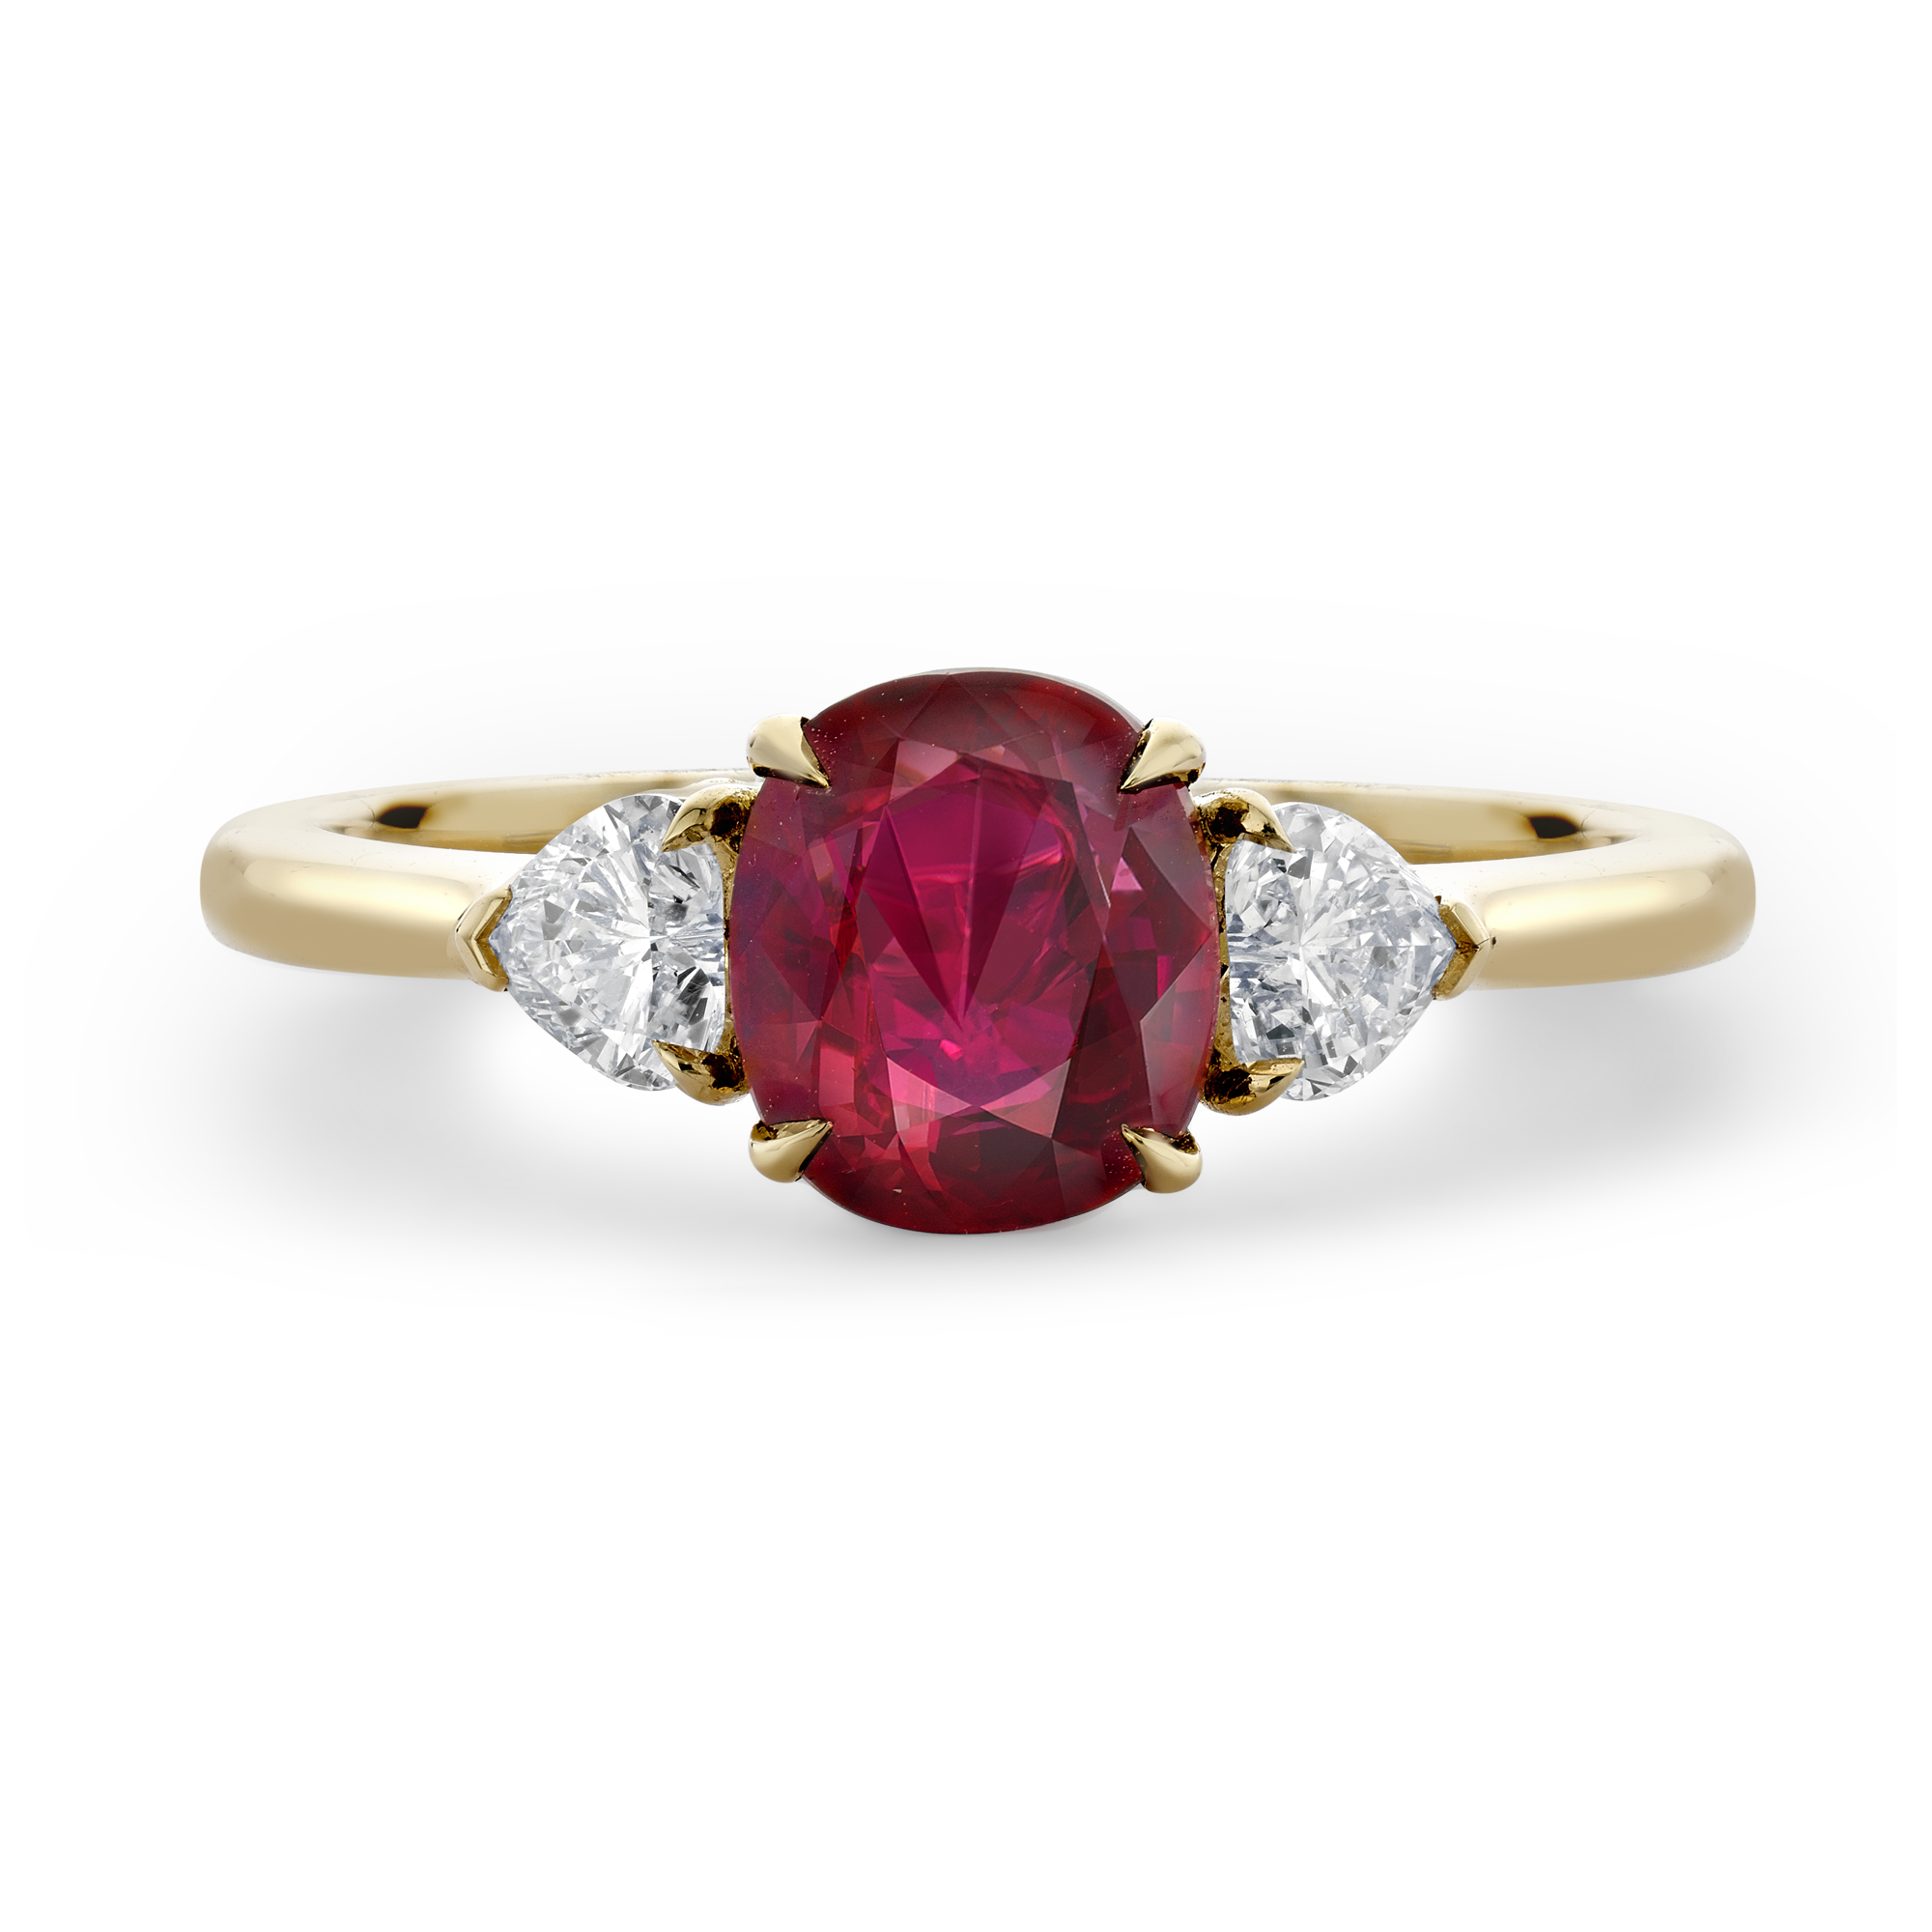 Mozambique 1.76ct Pigeon Blood Red Ruby and Diamond Three Stone Ring Oval Cushion Cut, Claw Set_2